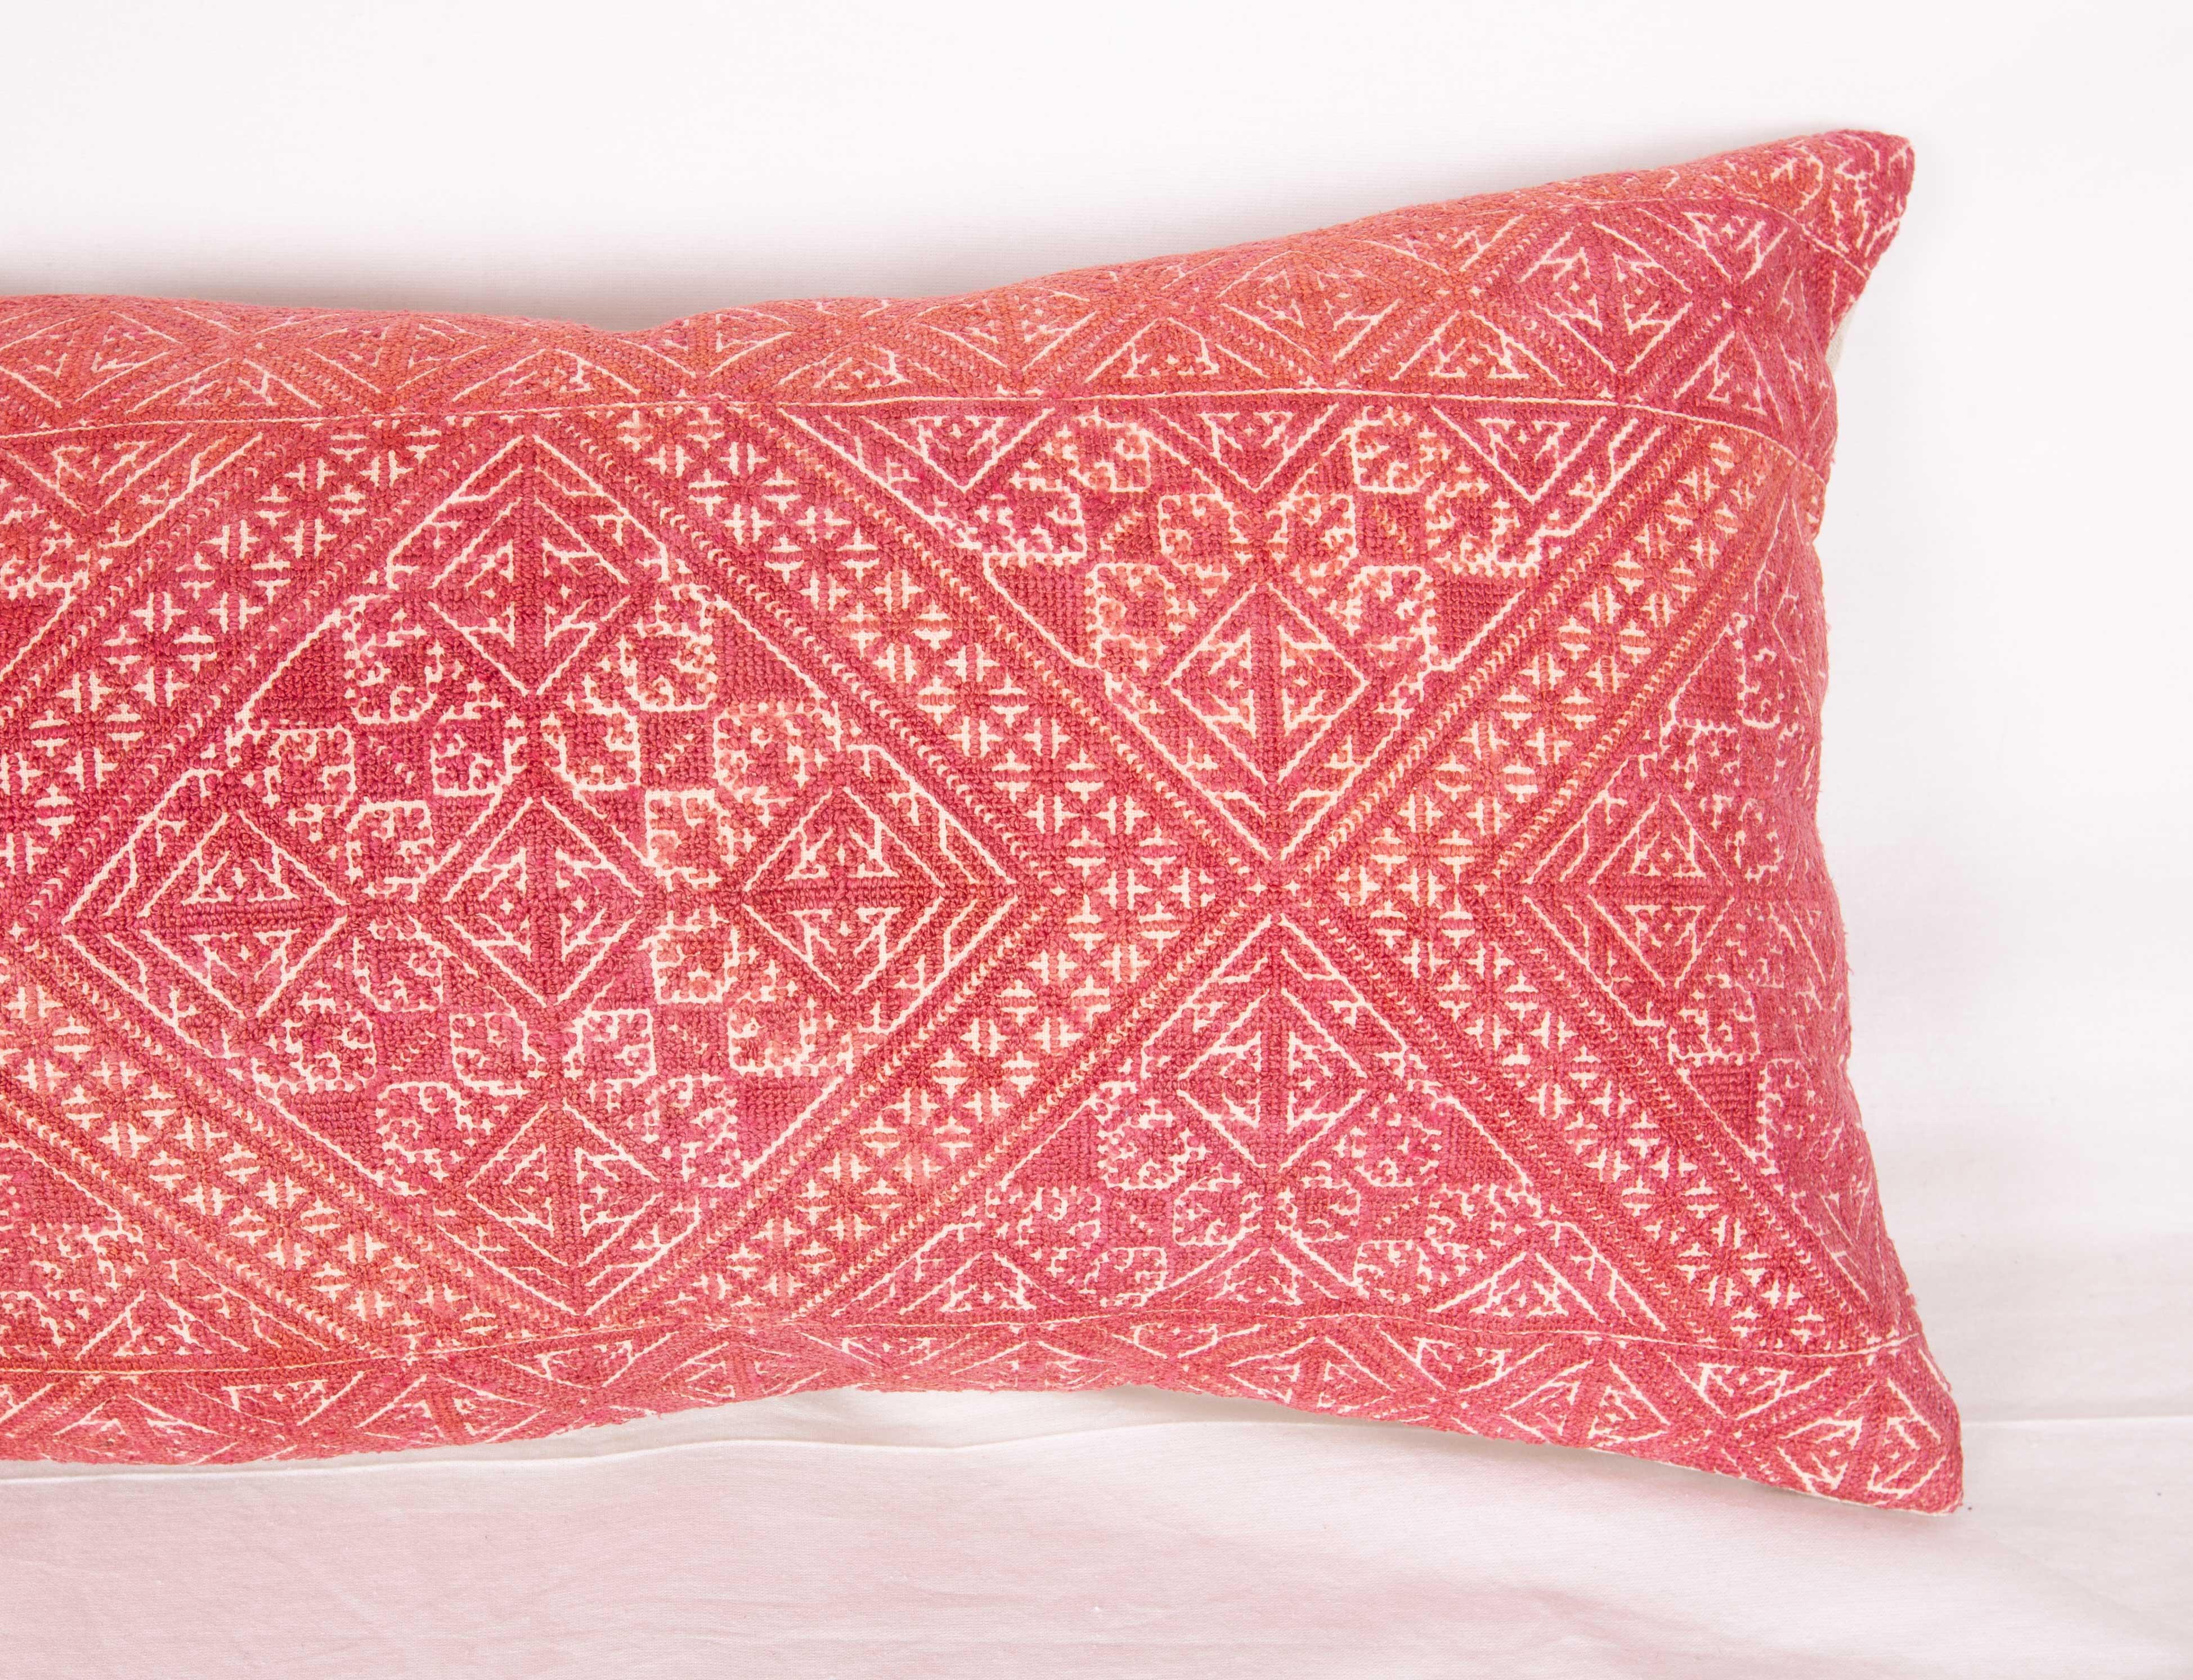 Embroidered Antique Lumbar Pillow Case Made from an Early 20th Century Fez Embroidery